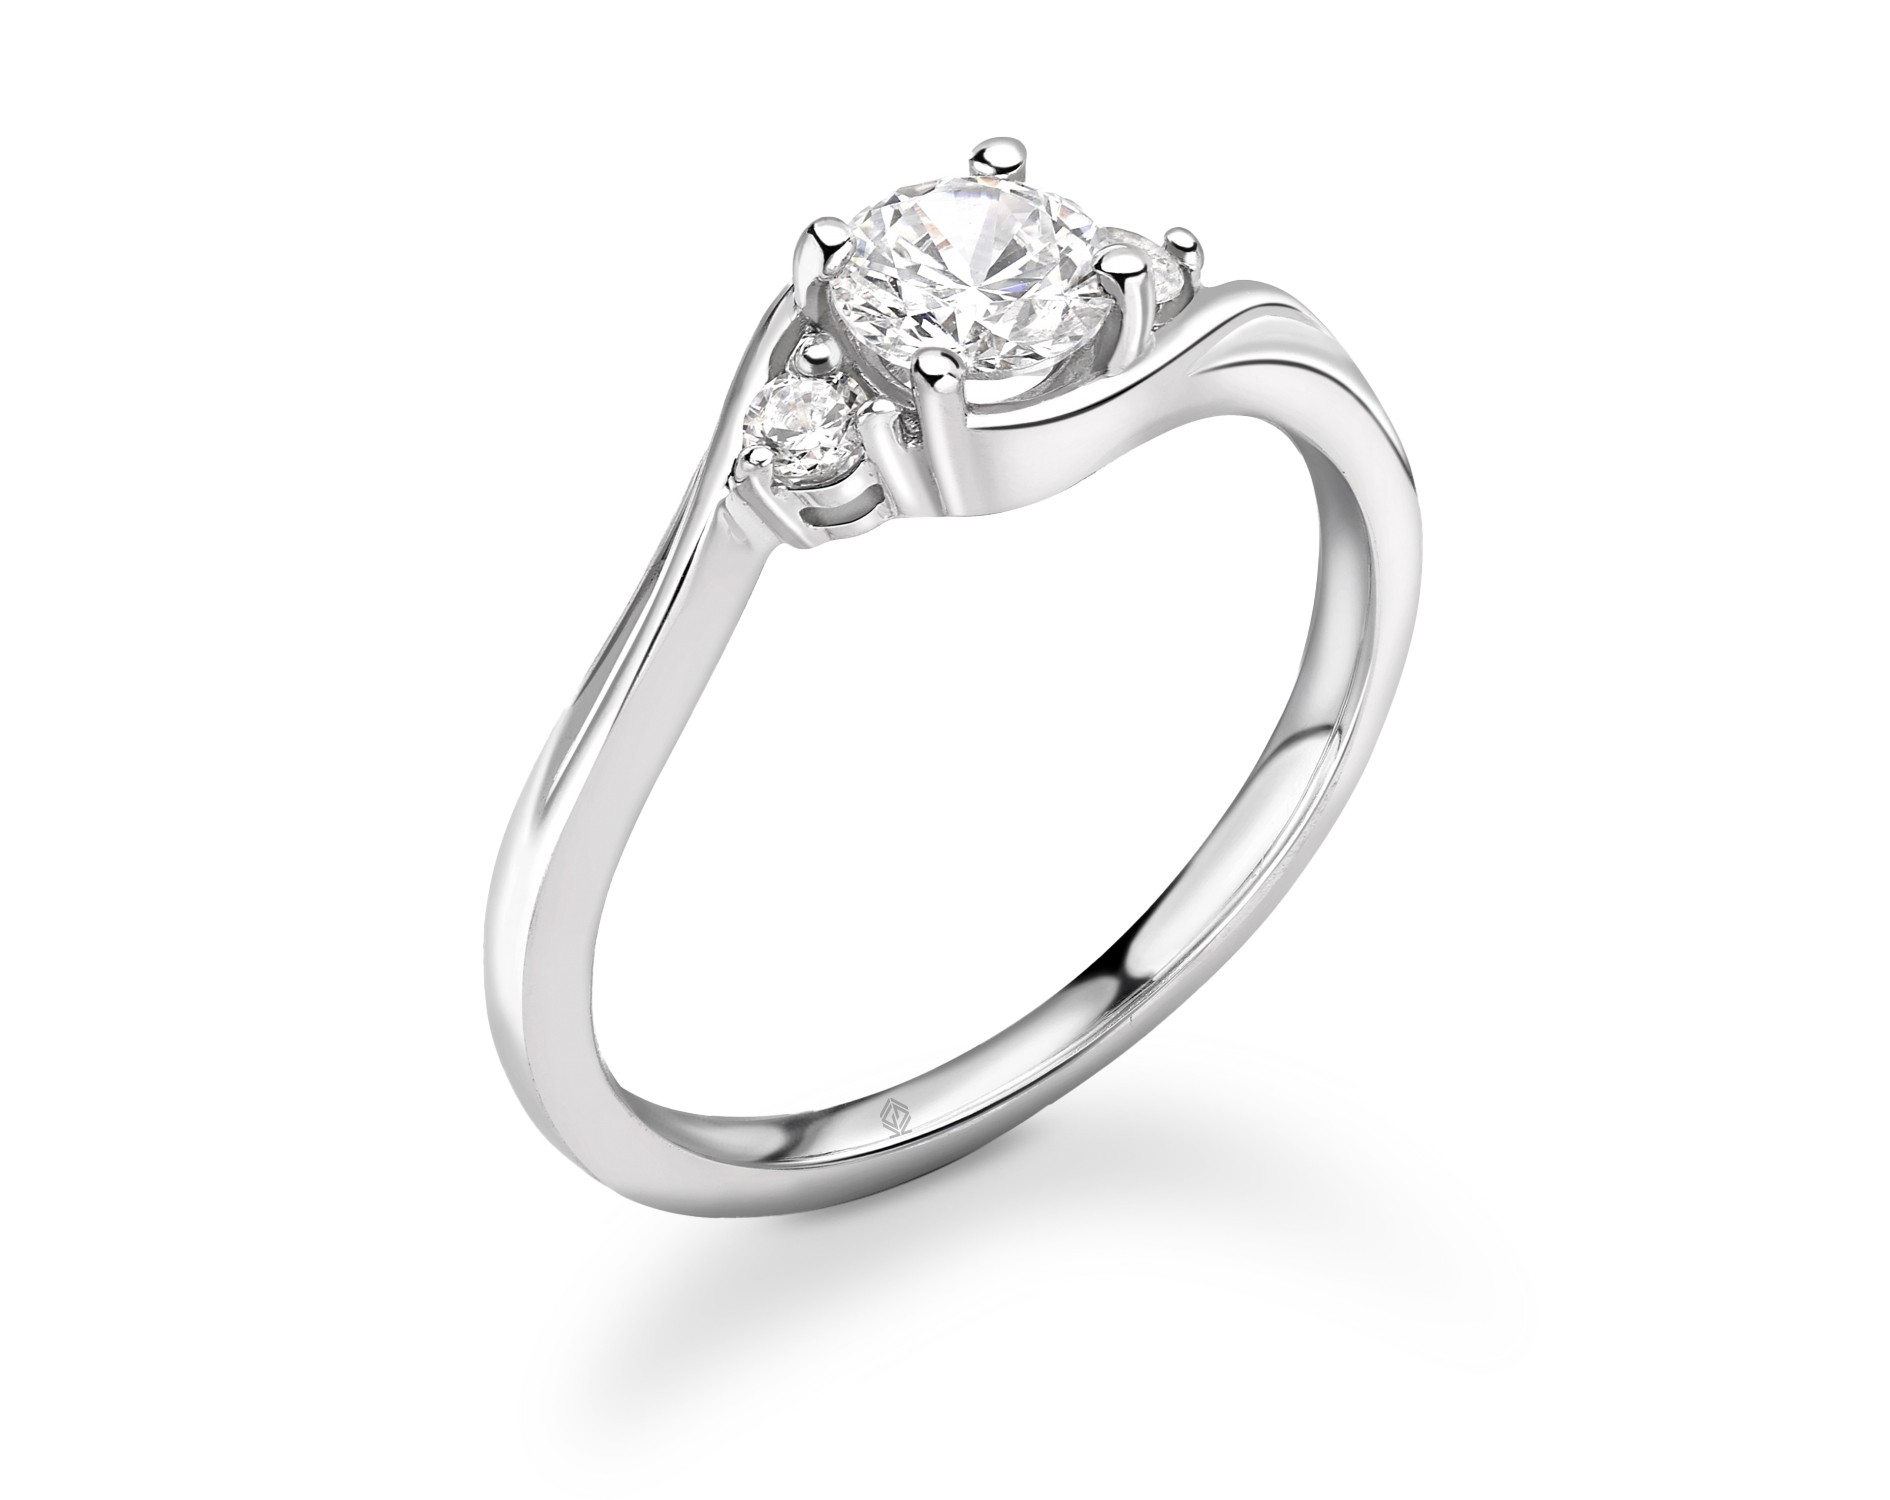 18K WHITE GOLD ROUND CUT TRILOGY DIAMOND ENGAGEMENT RING WITH TWISTED SHANK